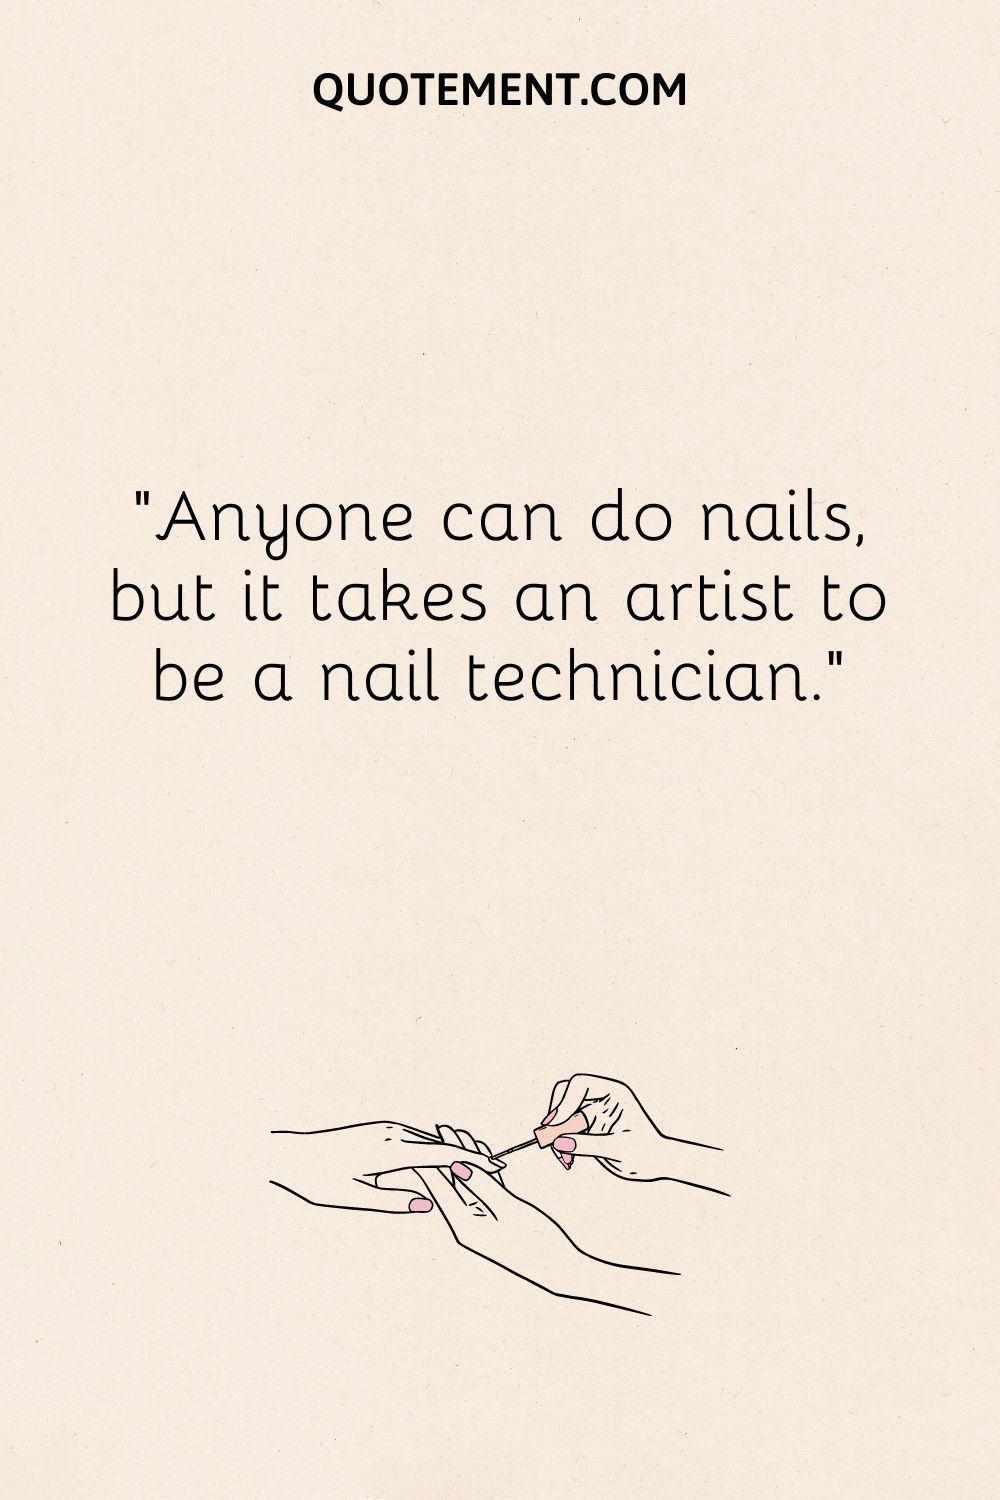 Anyone can do nails, but it takes an artist to be a nail technician